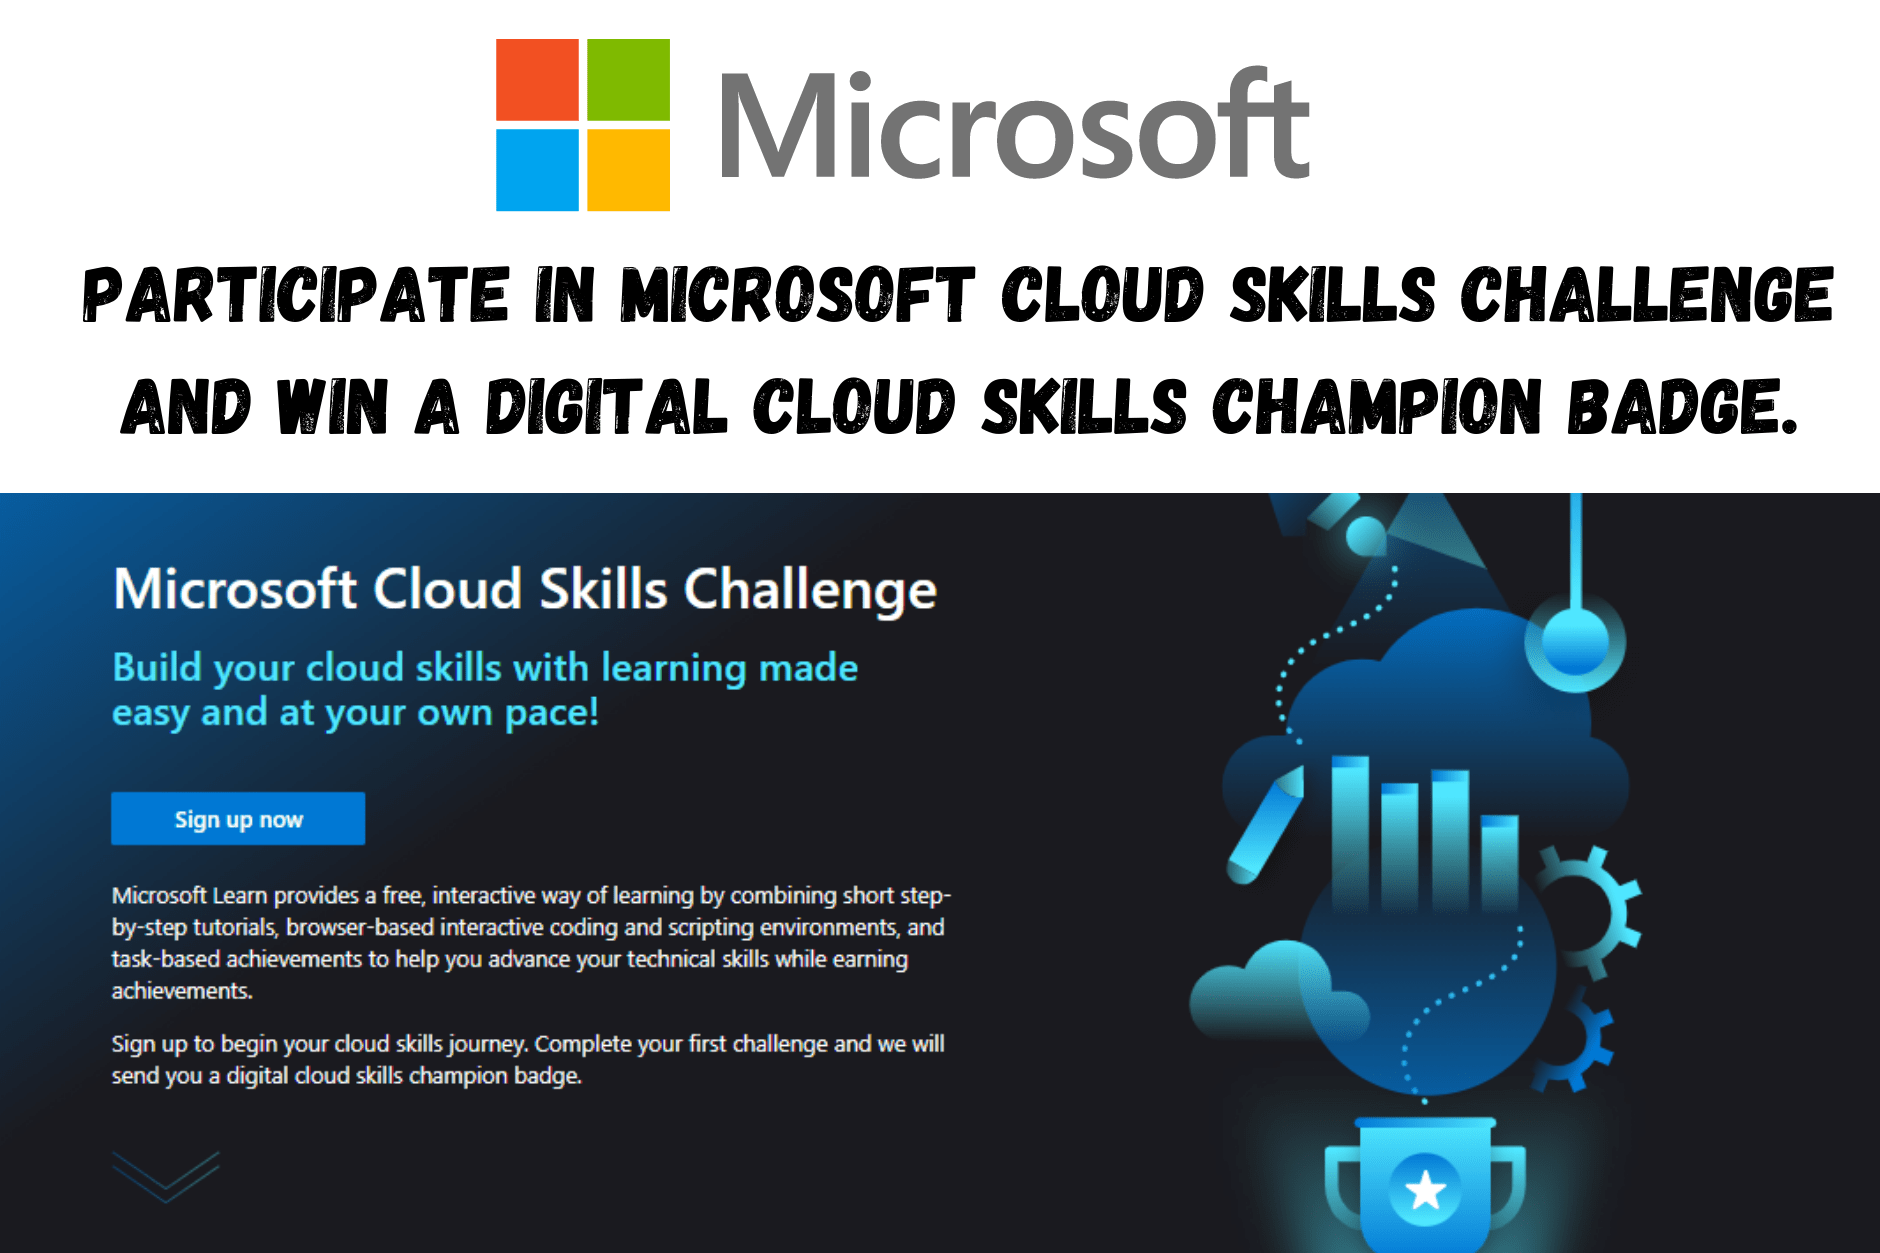 Participate in Microsoft Cloud Skills Challenge and get a champion badge